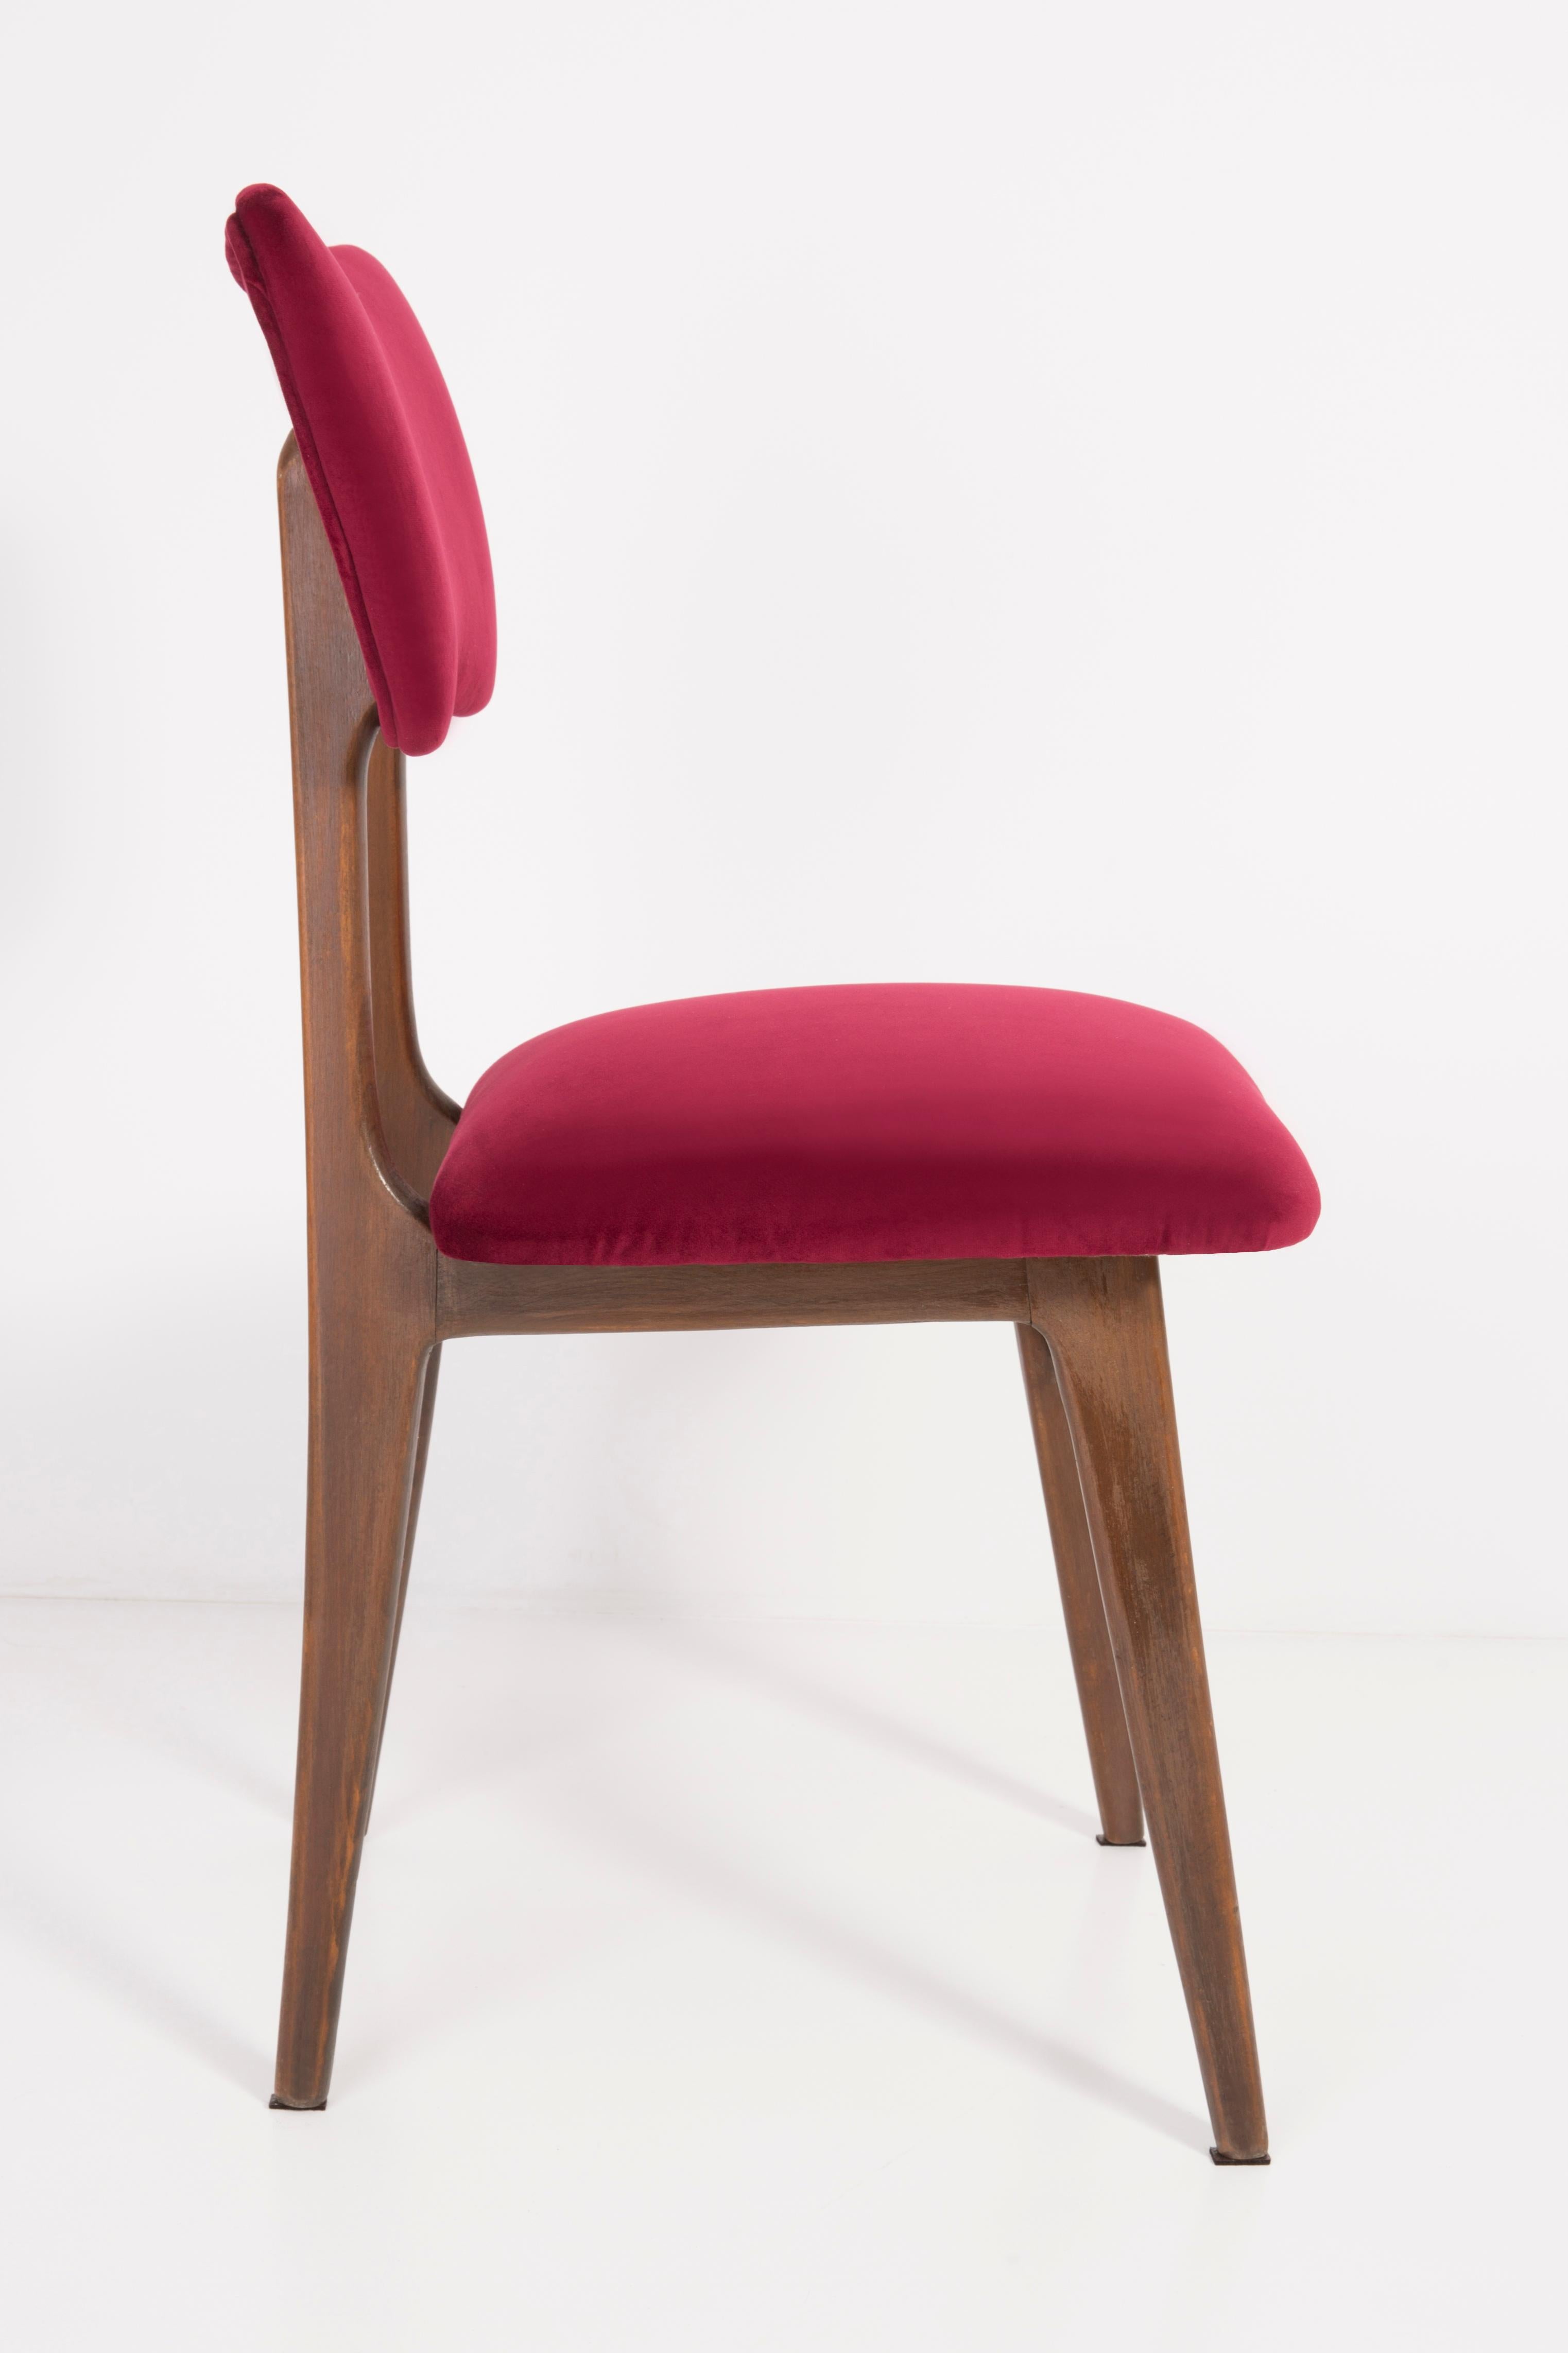 Six 20th Century Burgundy Red Chairs, 1960s For Sale 4